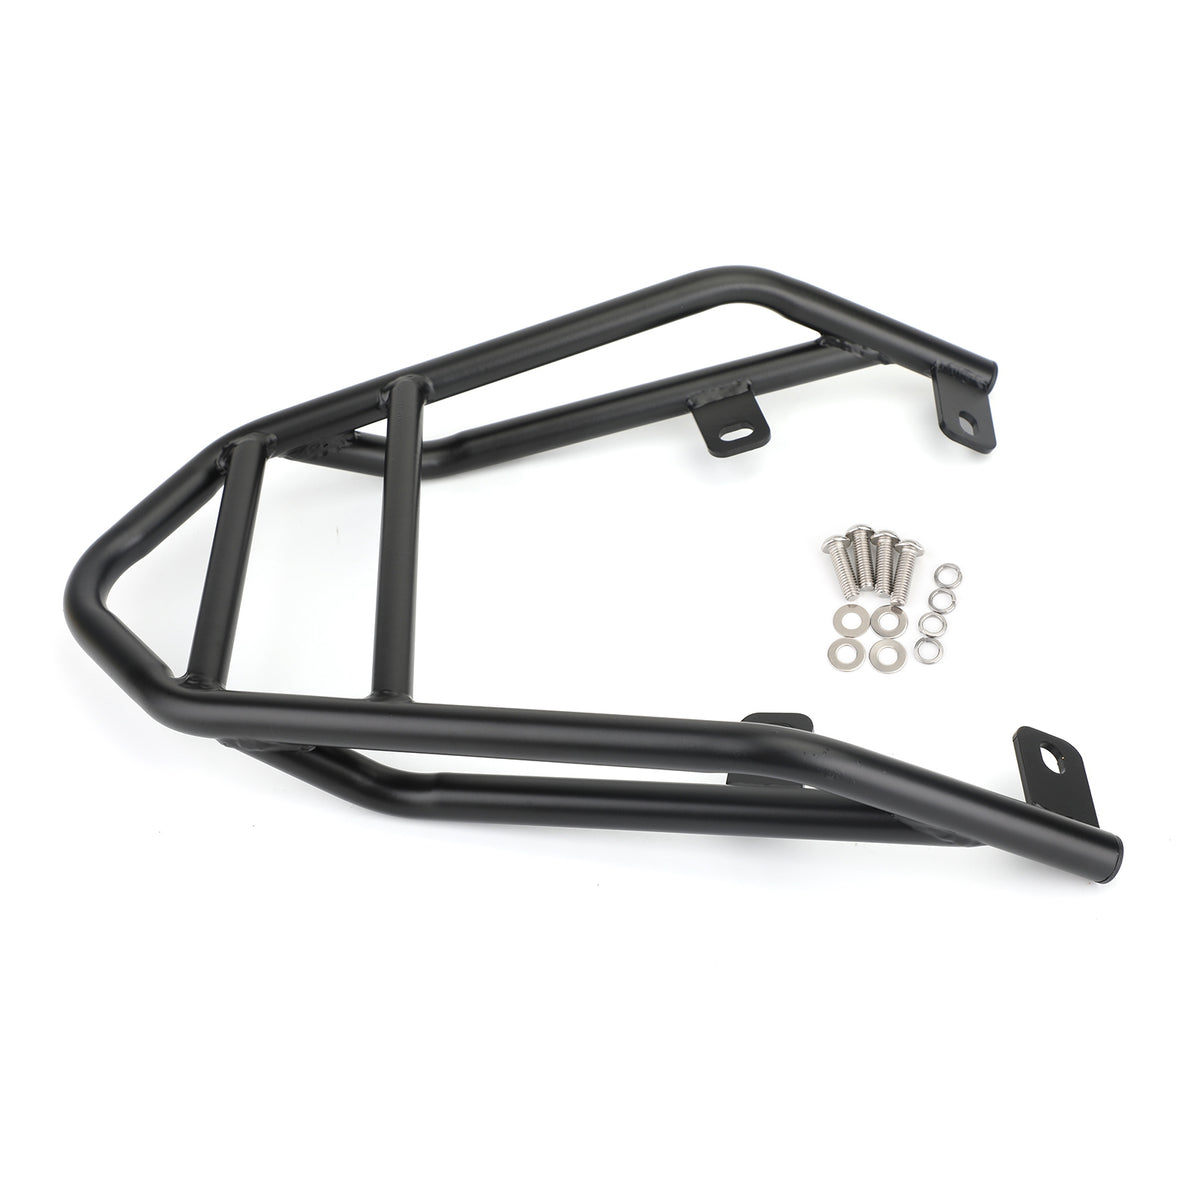 Rear Carrier Luggage Rack Fit for Ducati Scrambler 400 803 Sixty2 2016-2019